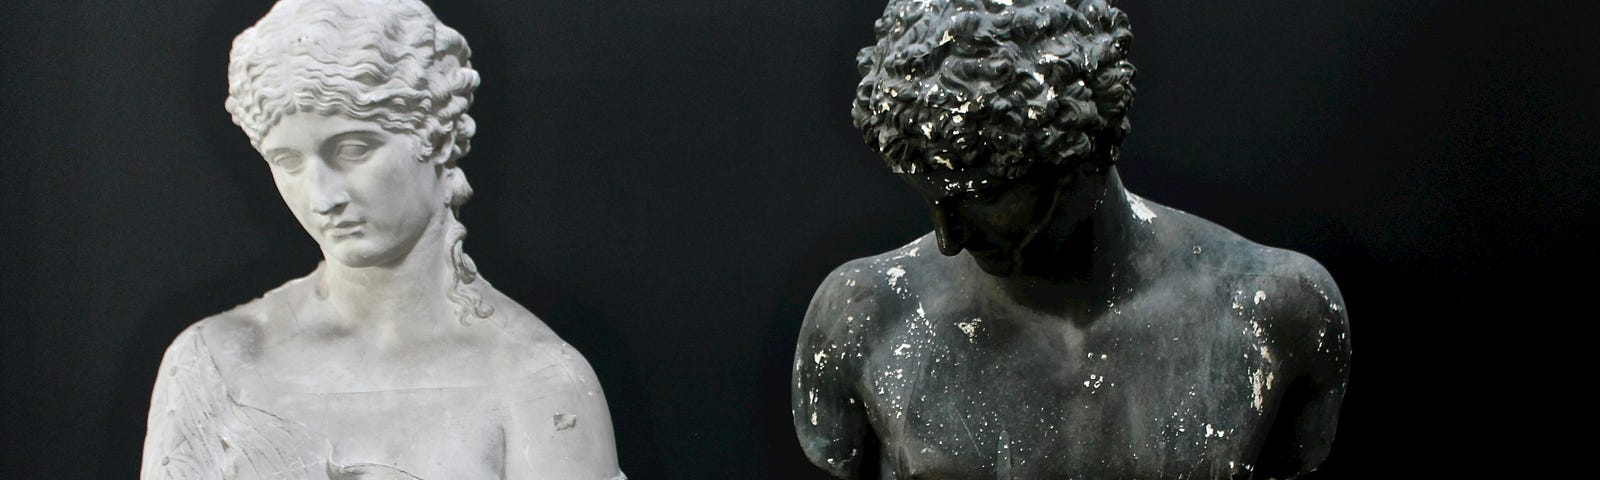 A white statue bust on the left, besides a charcoal gray bust on the right